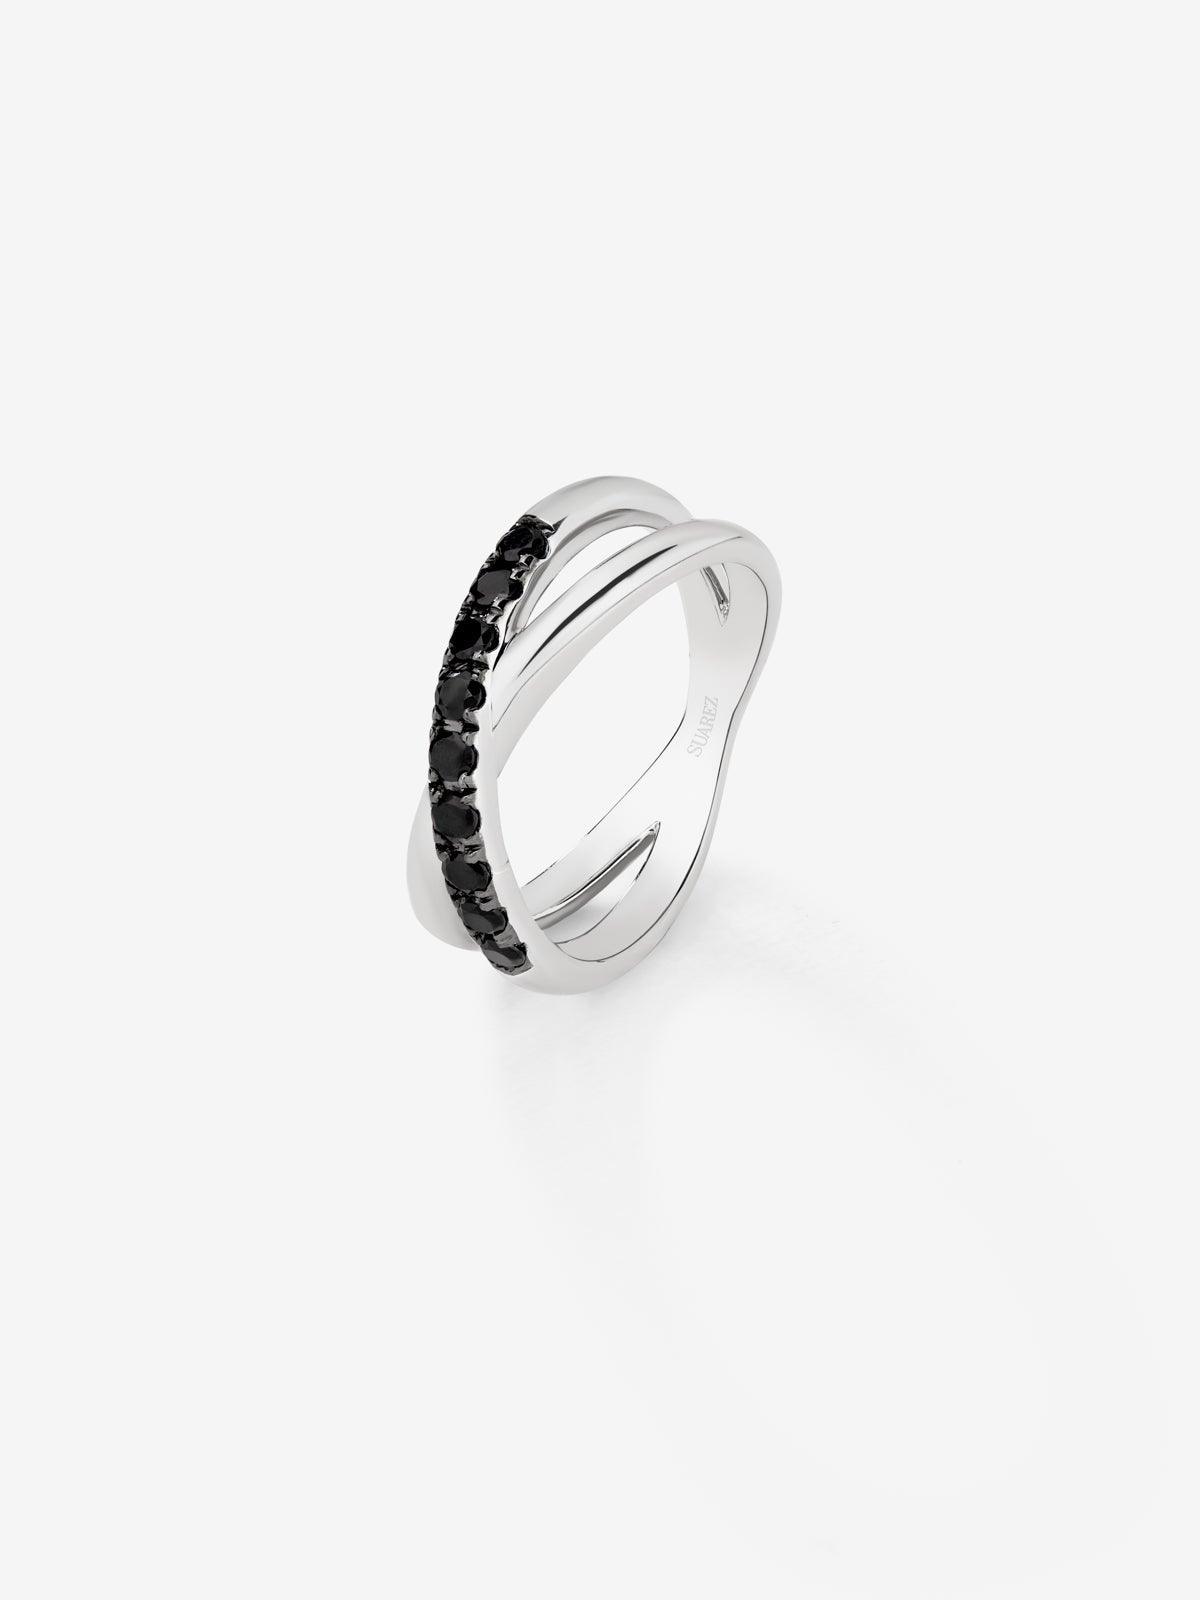 925 silver cross ring with 9 brilliant-cut black spinels with a total of 0.24 cts